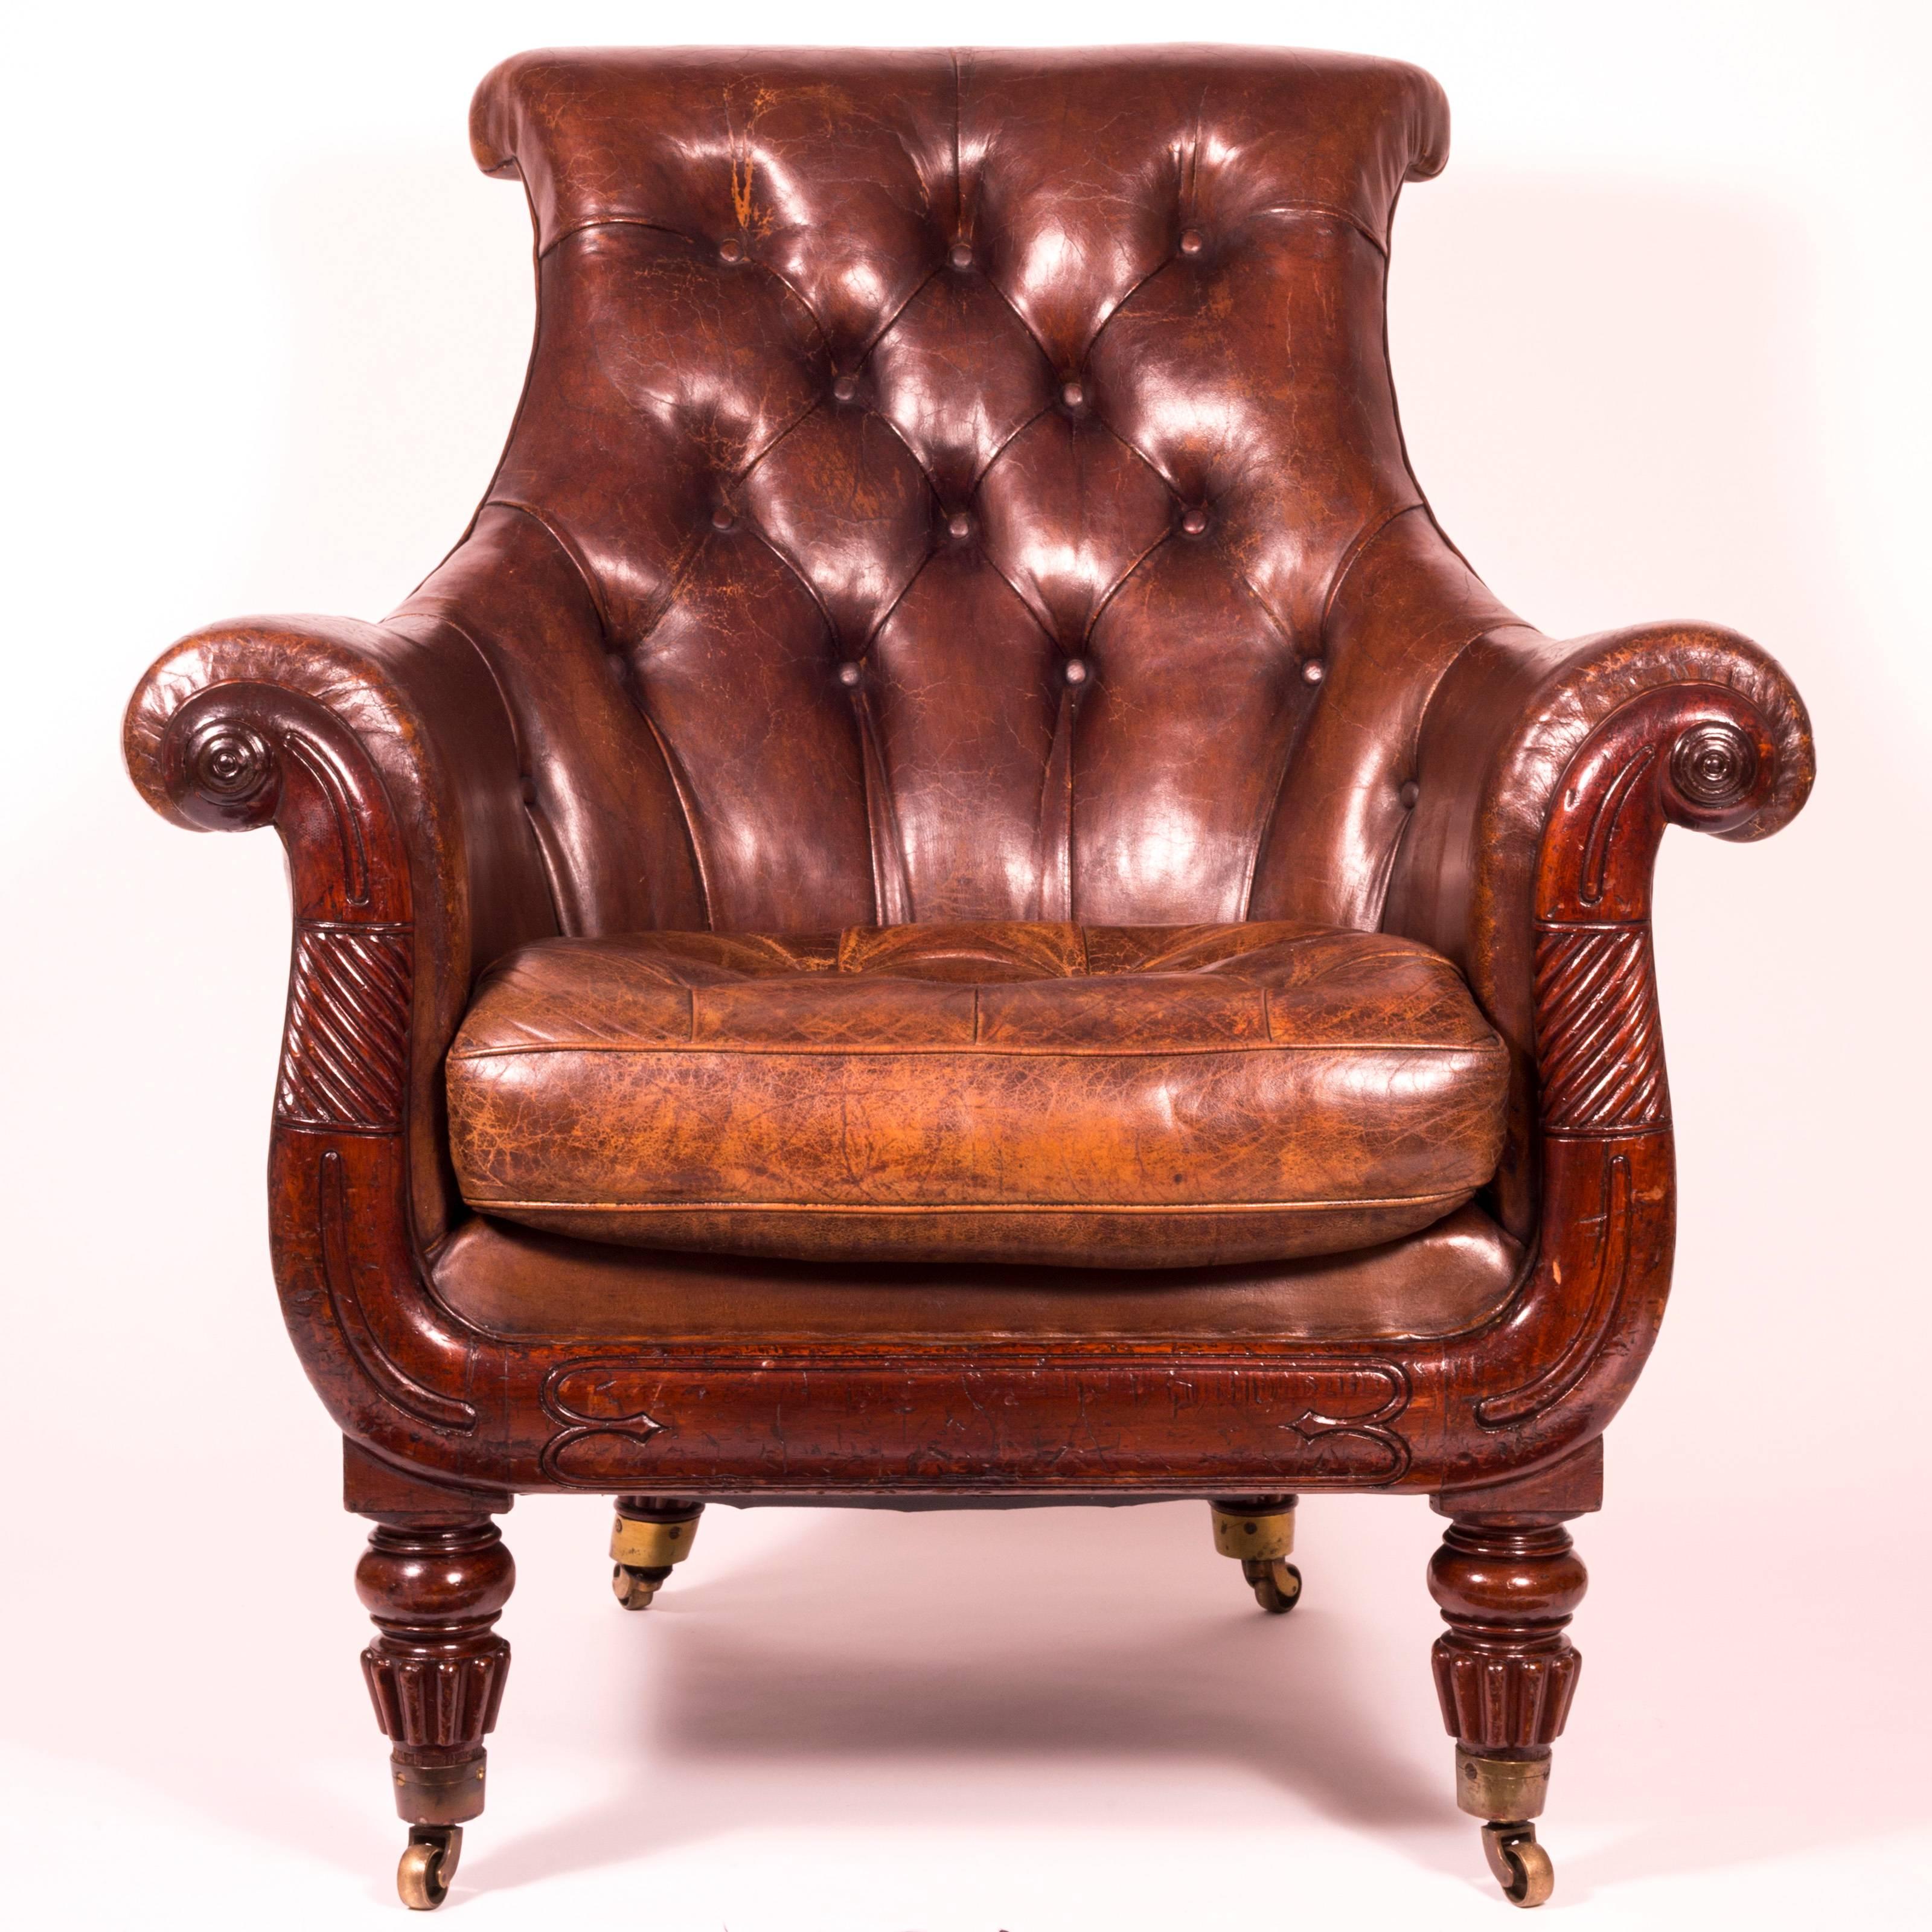 A stunning Regency period mahogany library bergère armchair of generous proportions, firmly attributed to Gillows of Lancaster and London,

England, circa 1820

The scrolled and buttoned padded back, within the scrolled arms, over a buttoned loose